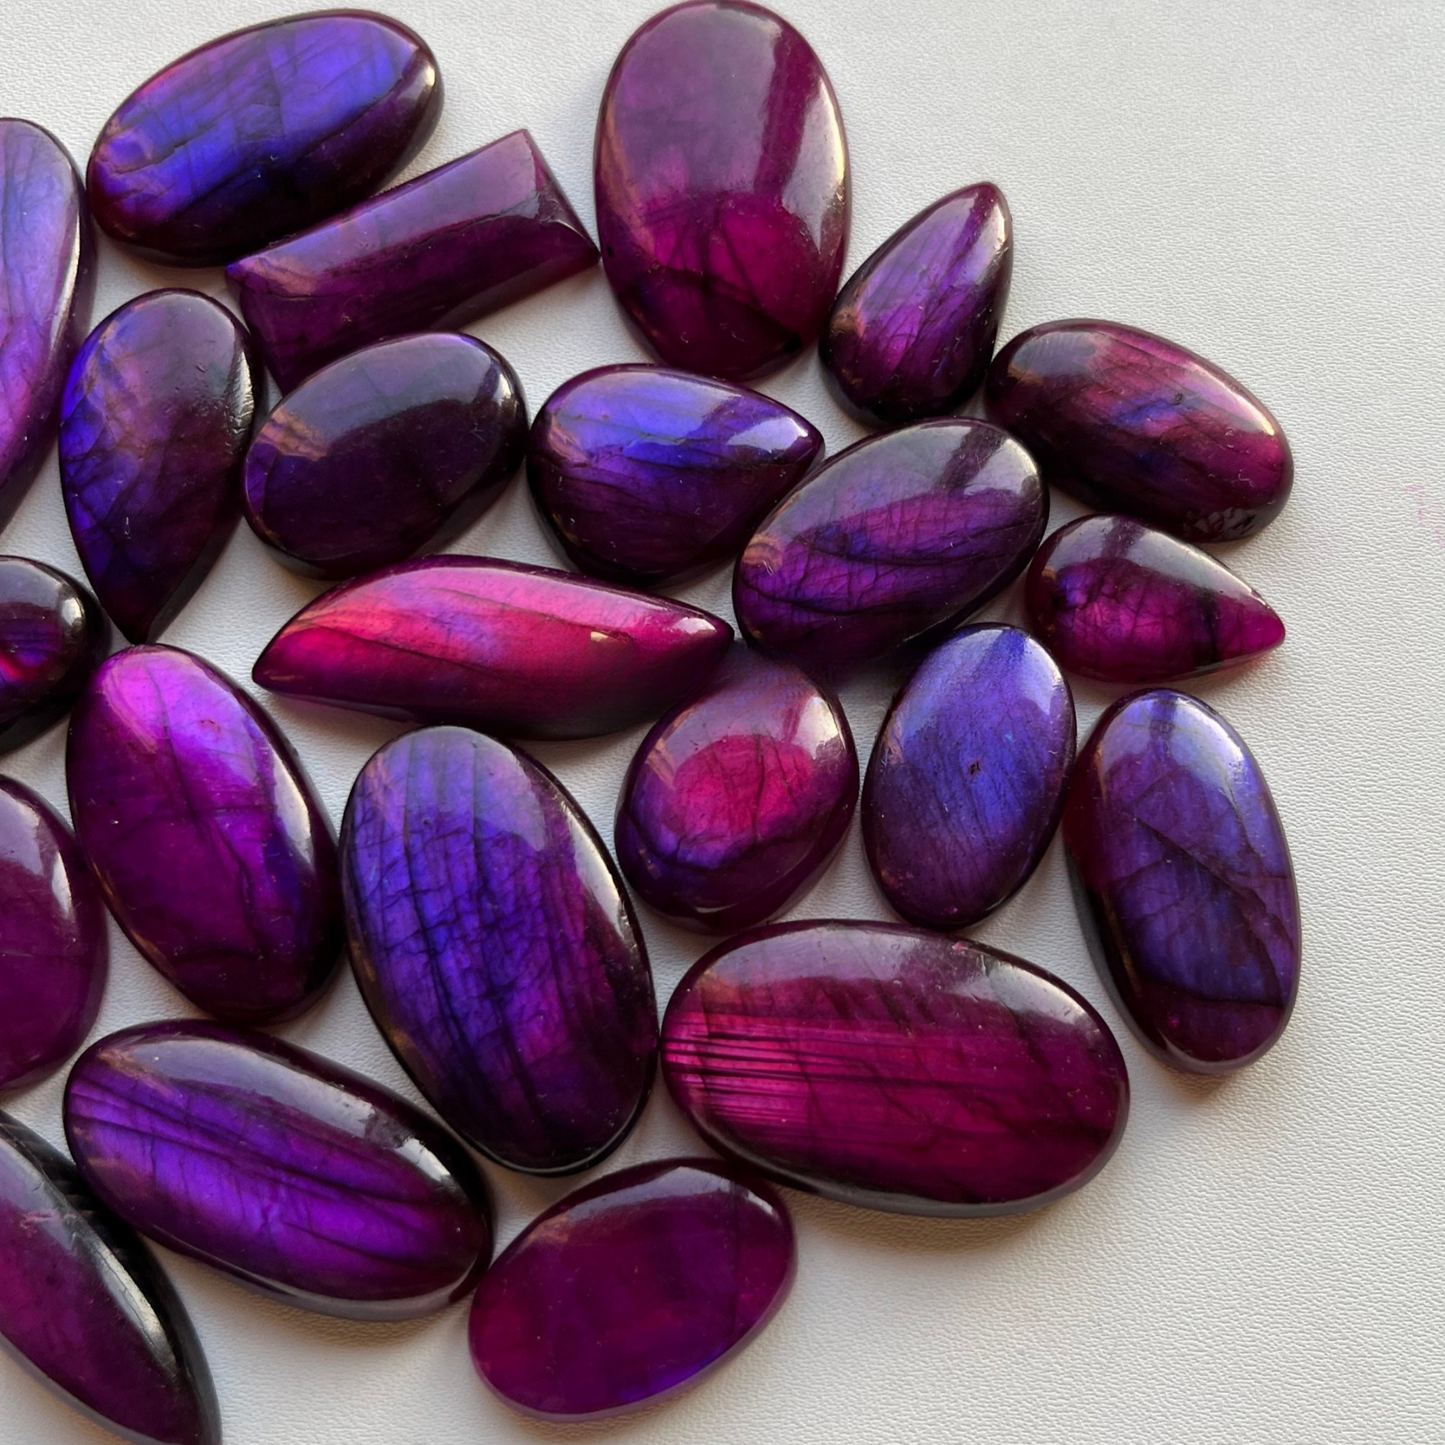 DYED Purple Labradorite Cabochon Wholesale Lot By Weight Used For Jewelry Making